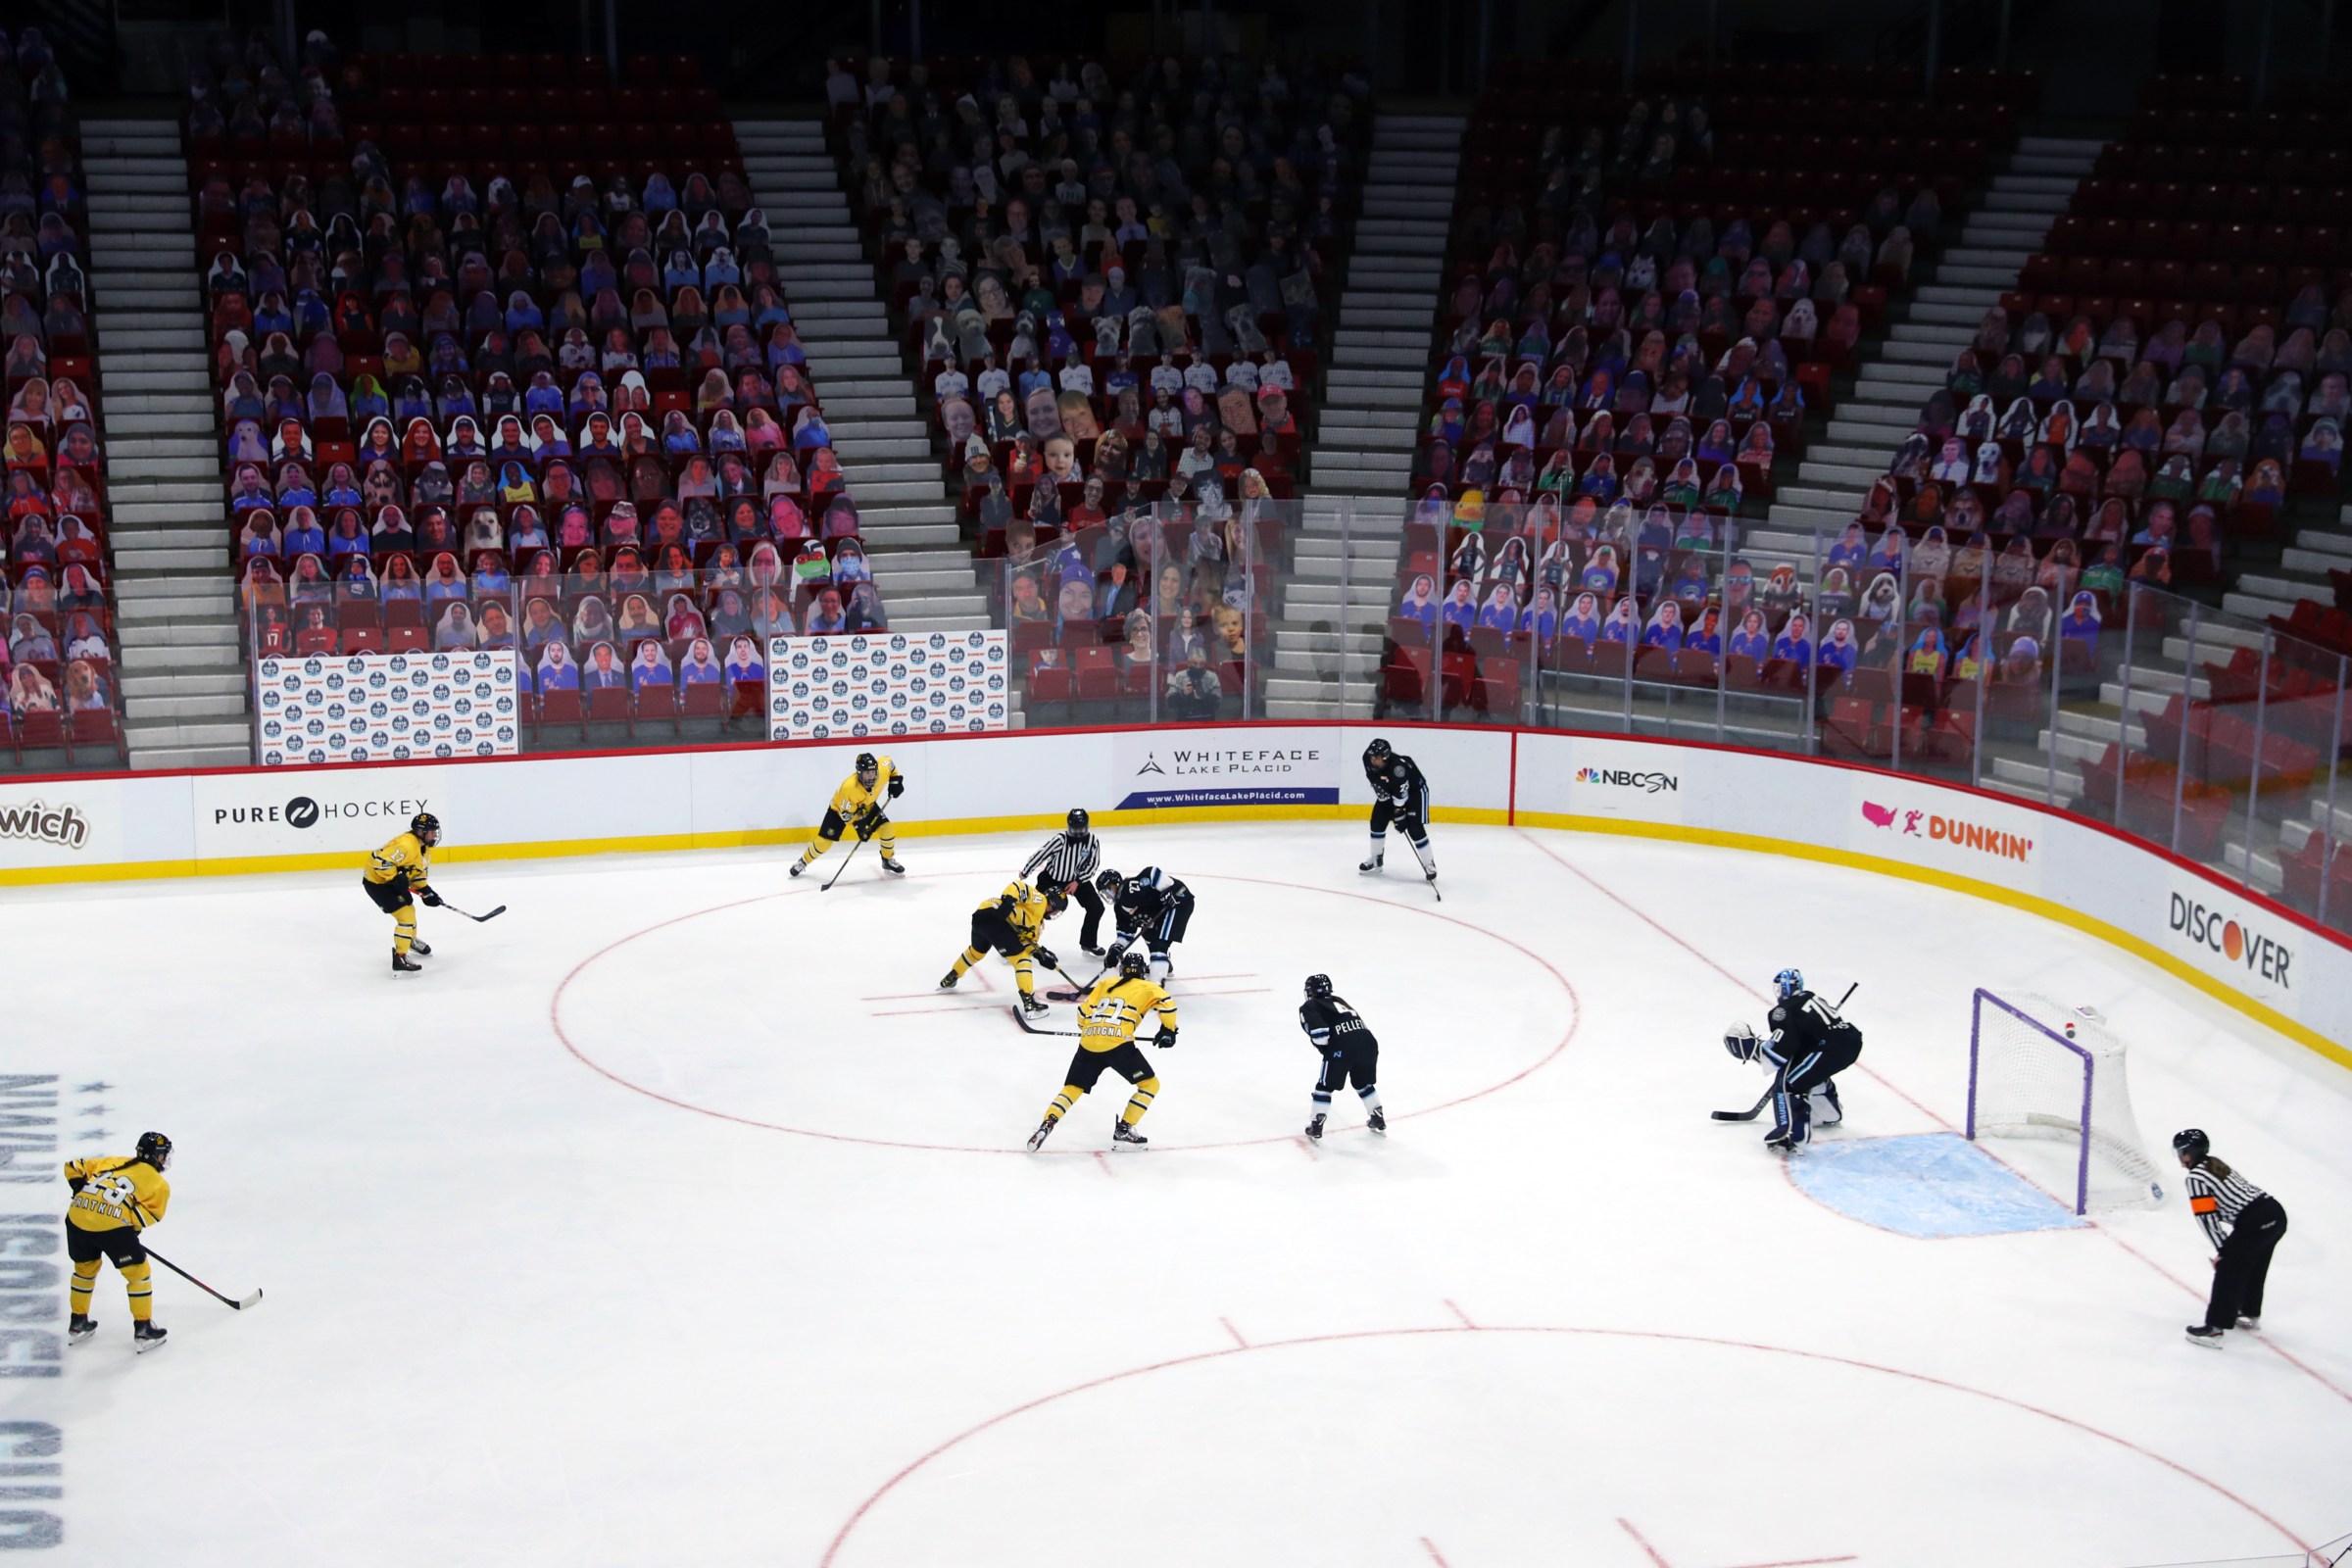 A general view of a face off during the first period of the Isobel Cup Game between the Buffalo Beauts and the Boston Pride at Herb Brooks Arena on February 01, 2021 in Lake Placid, New York.